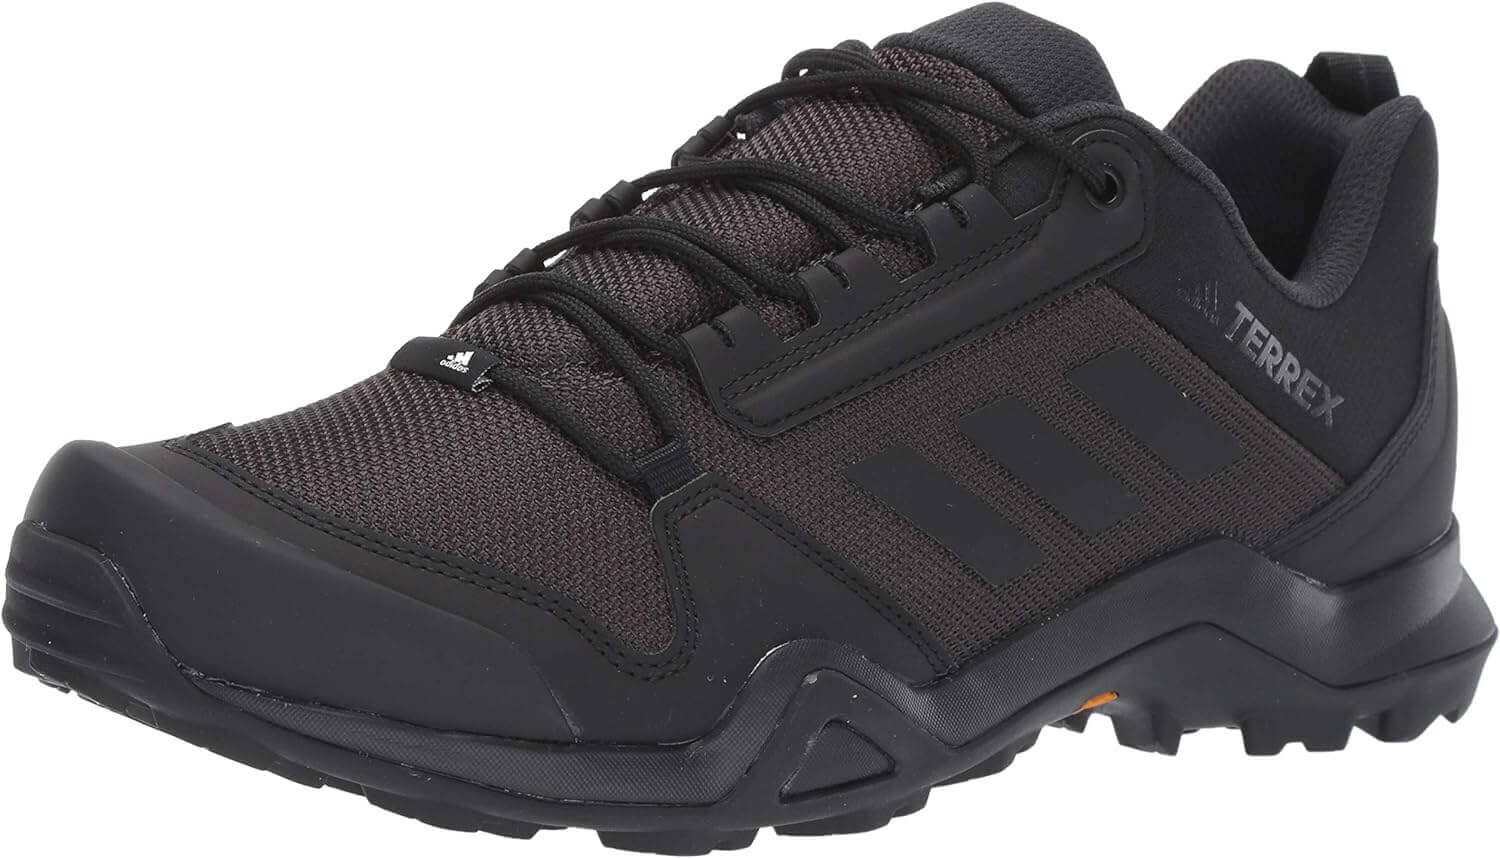 Shop The Latest >adidas Outdoor Men's Terrex Ax3 Trail Running Shoe > *Only $107.33*> From The Top Brand > *adidasl* > Shop Now and Get Free Shipping On Orders Over $45.00 >*Shop Earth Foot*